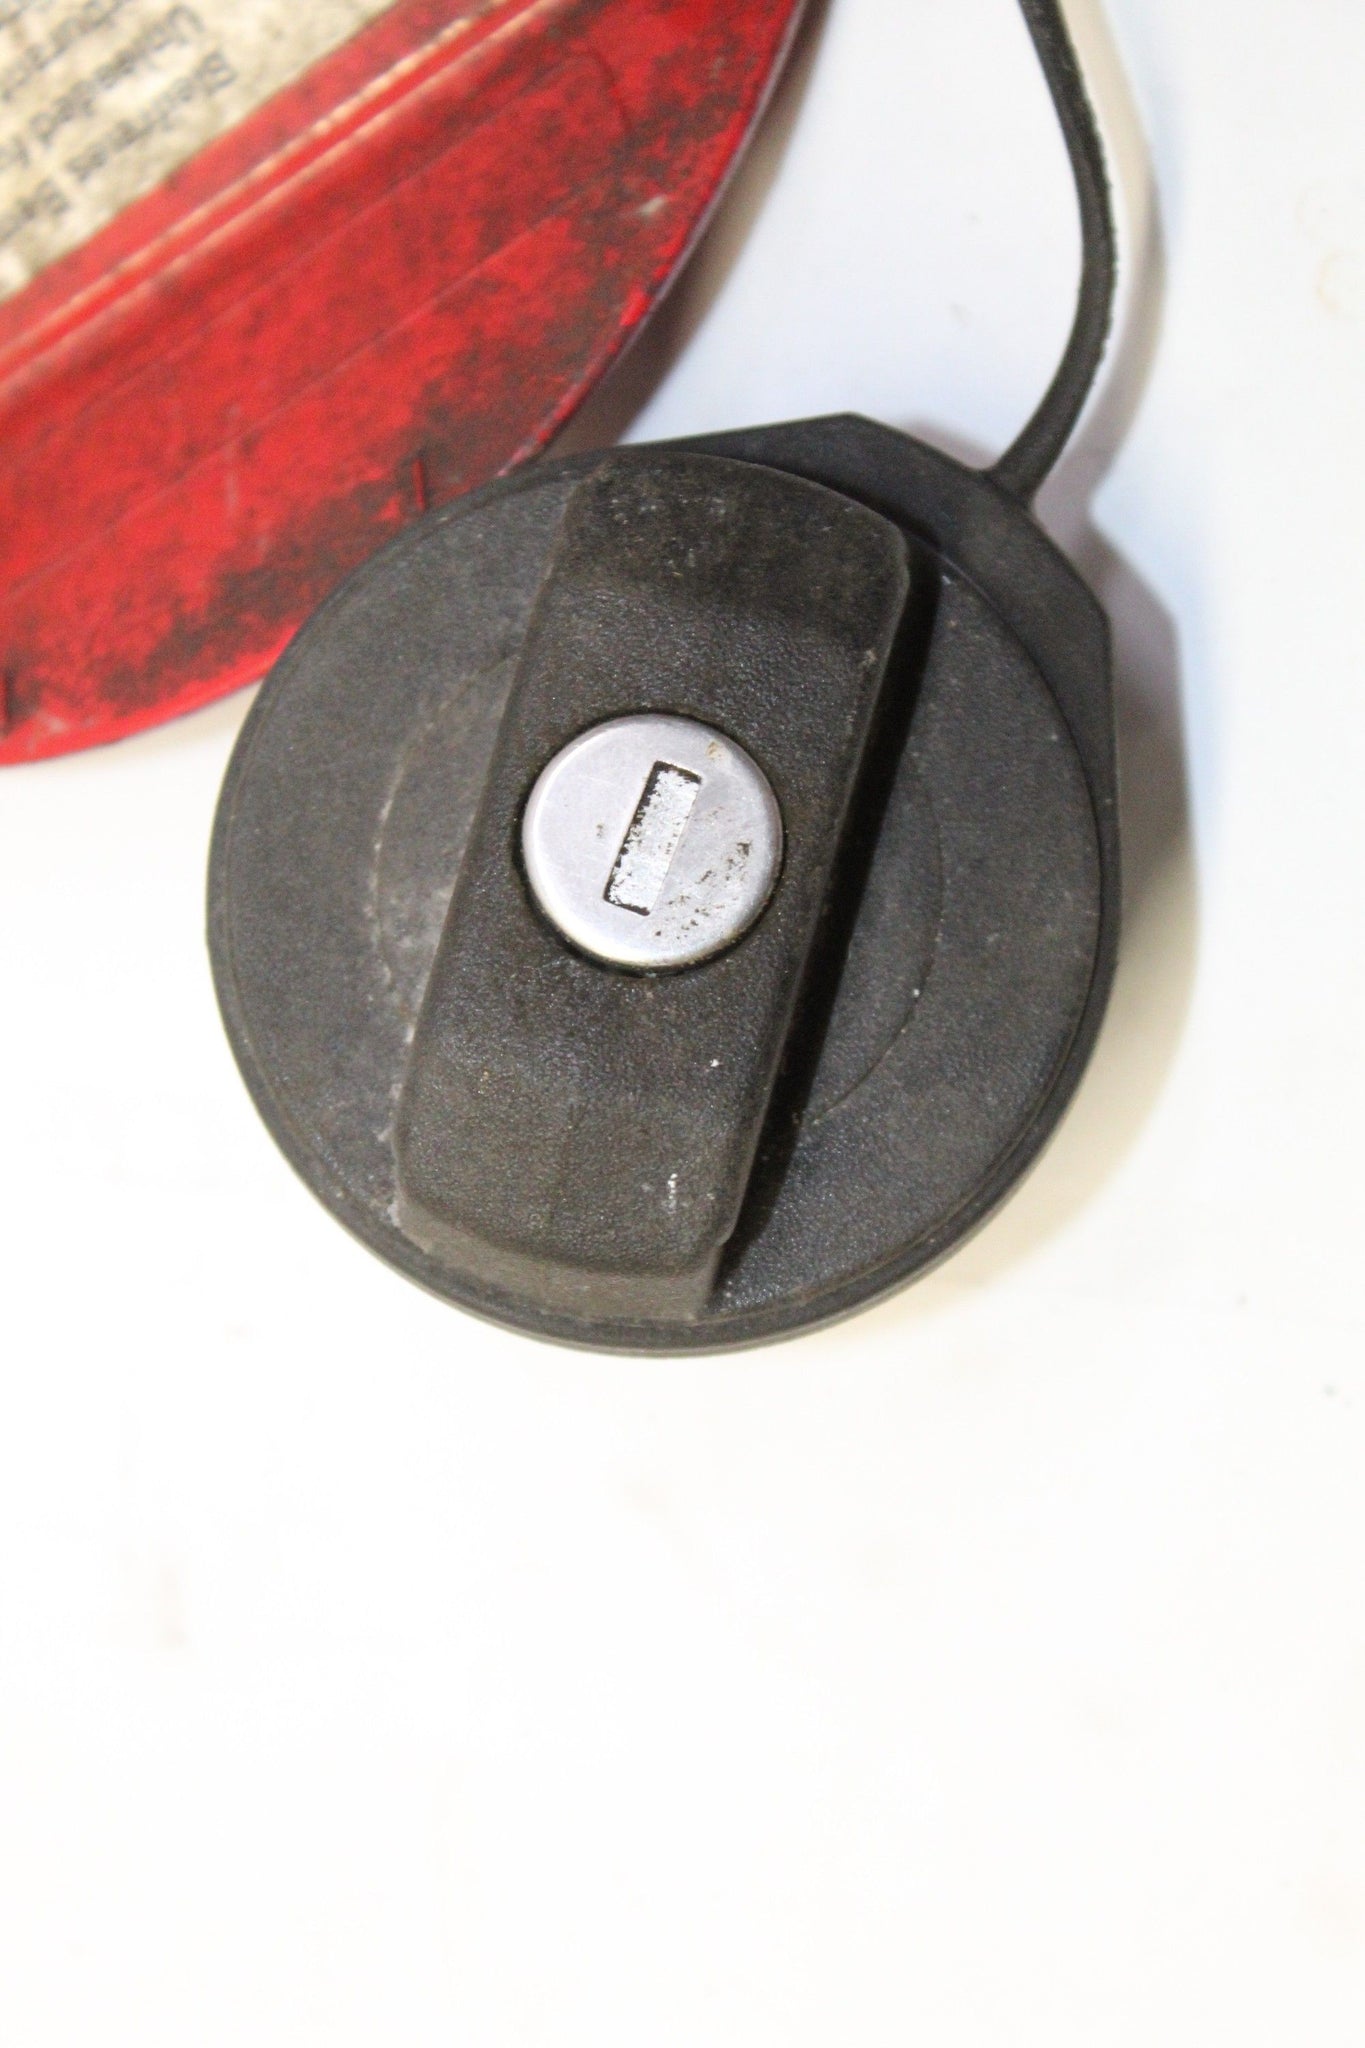 2015 SEAT IBIZA Fuel Filler Flap Cover and Cap 1H0010092